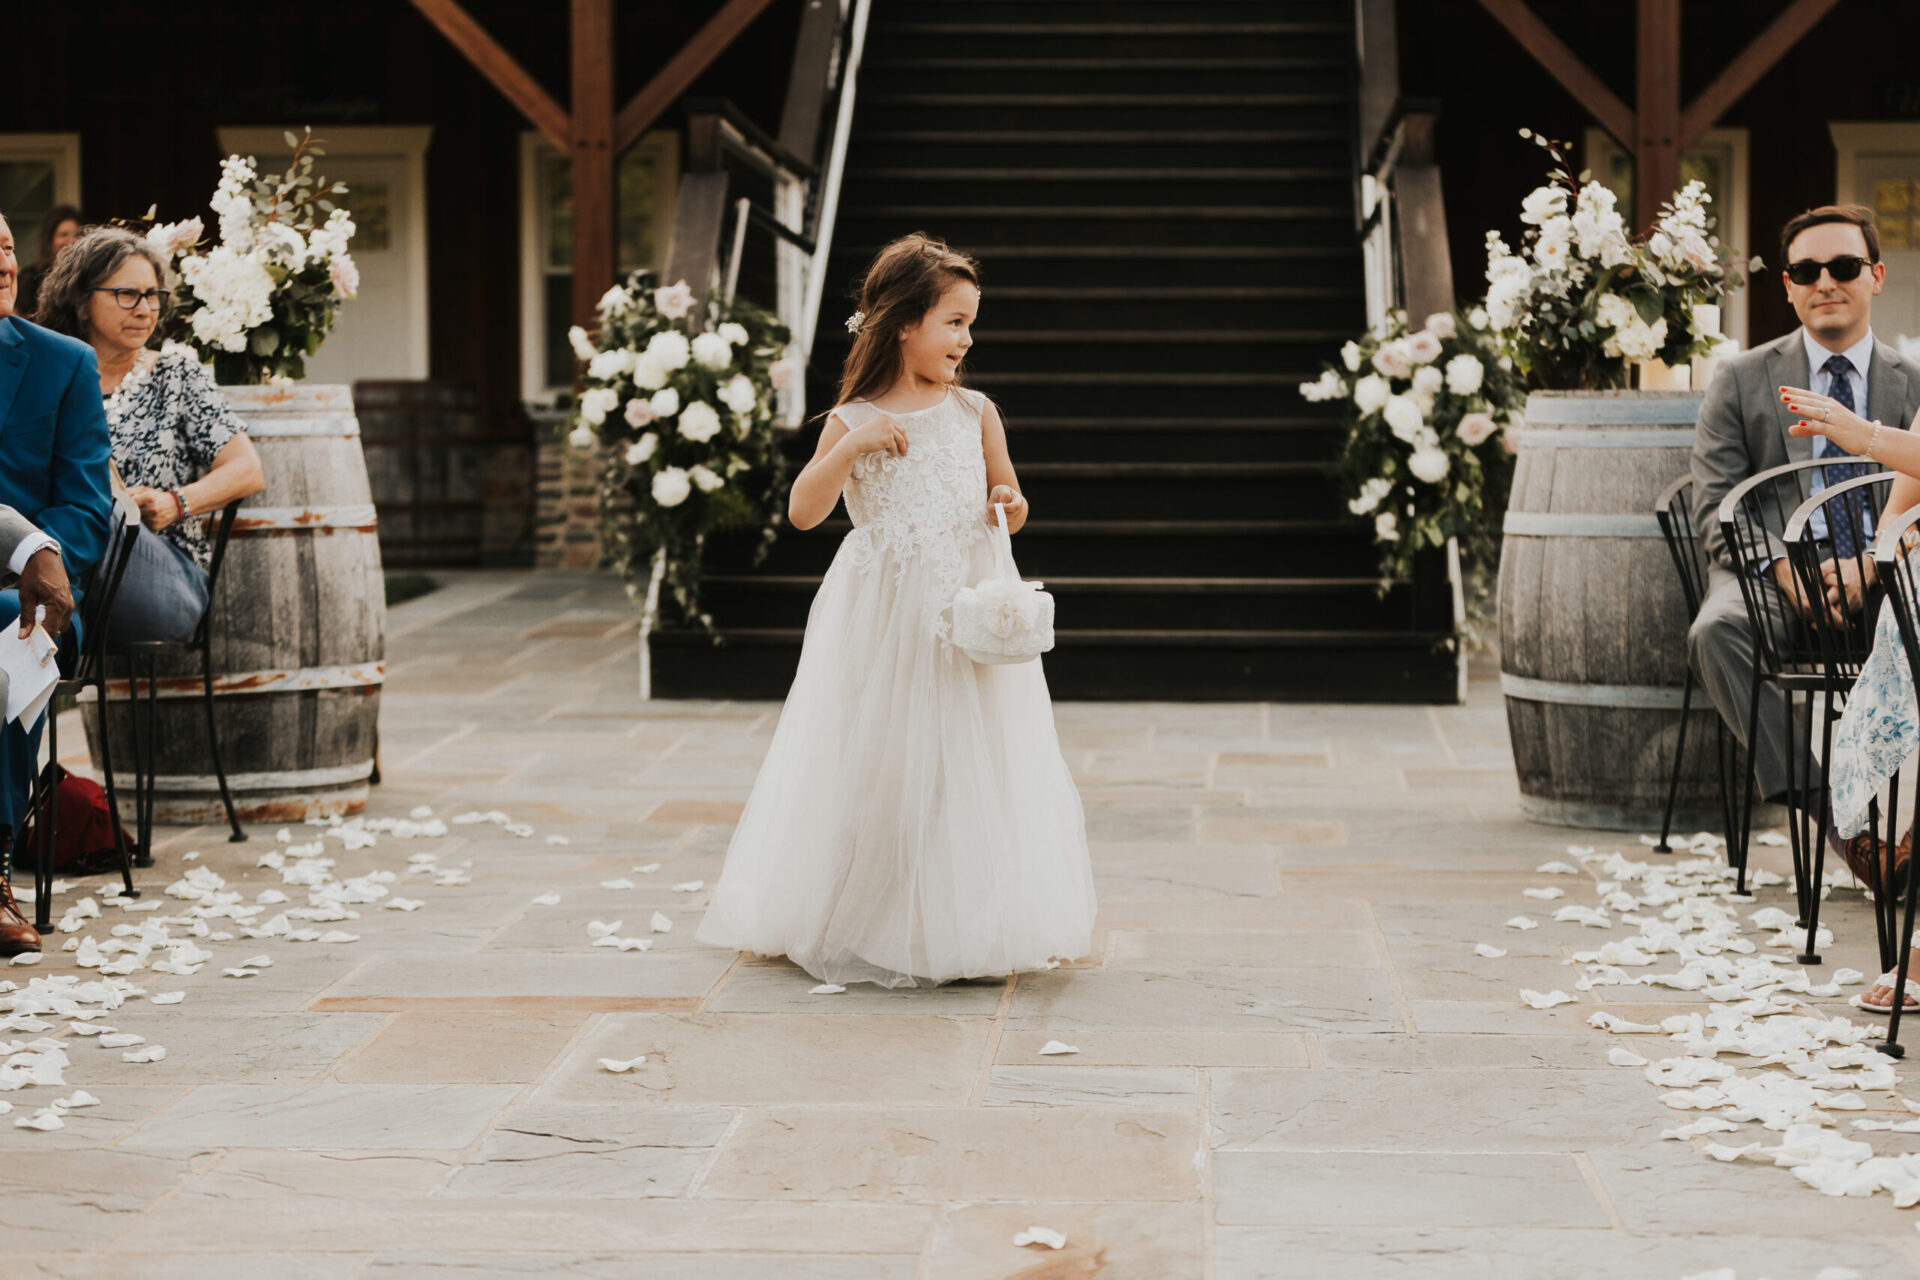 Zion Springs flower girl with white petals